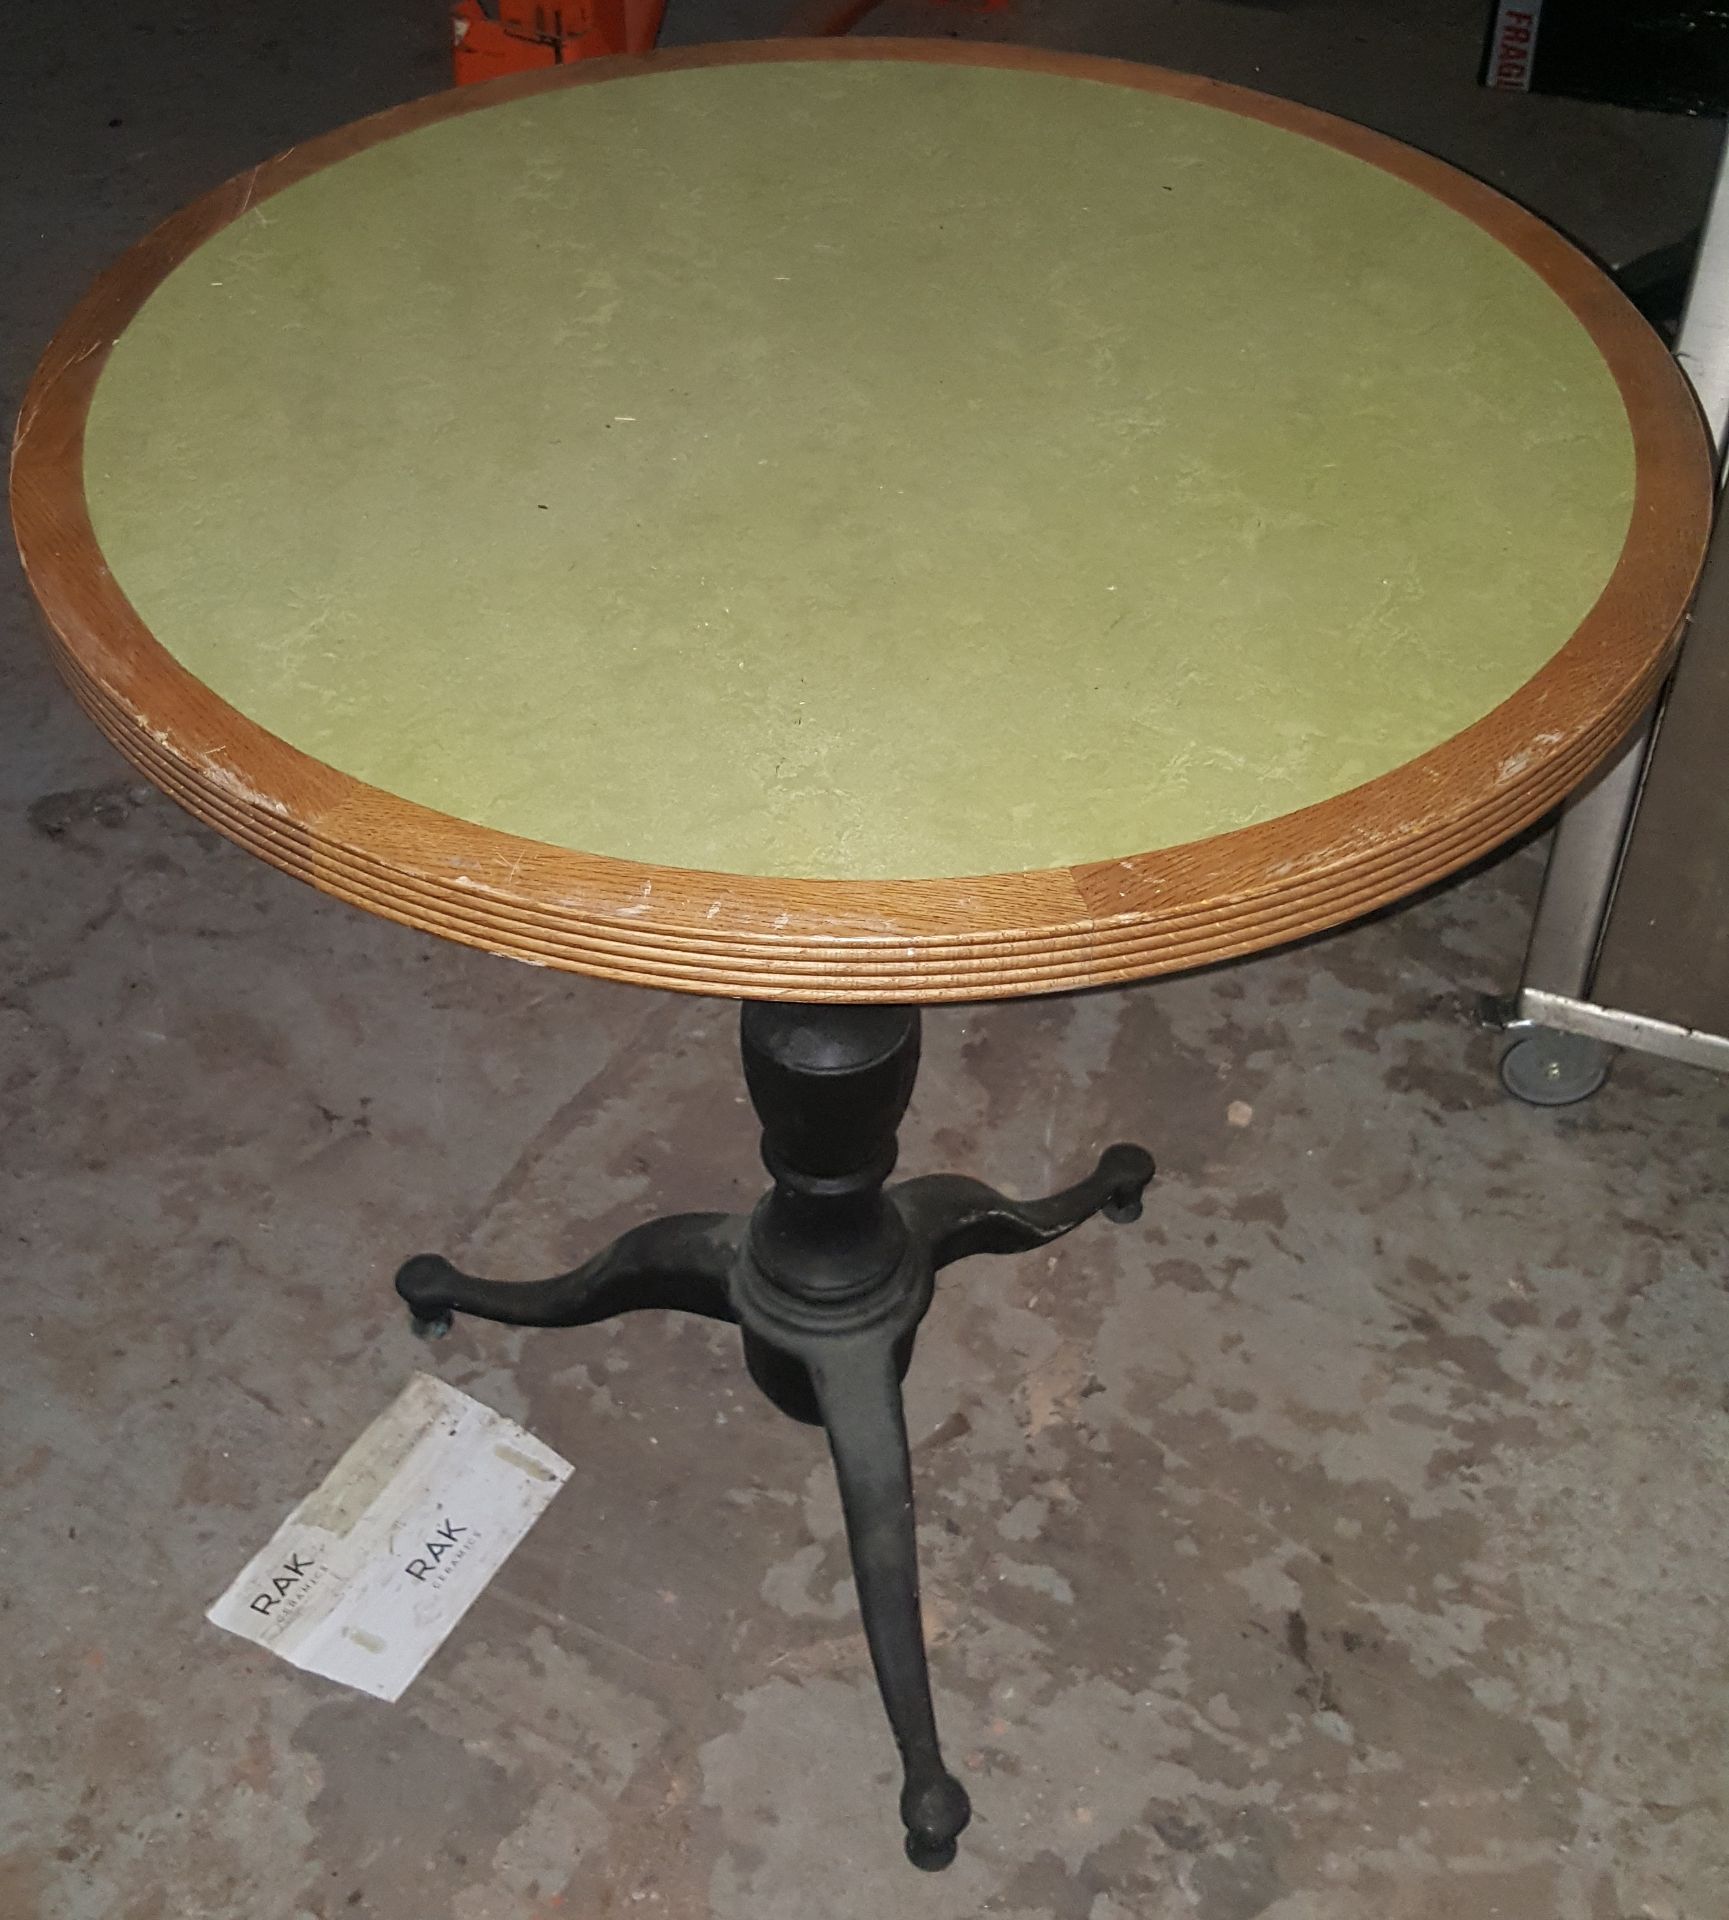 3 x Assorted Bistro Restaurant Tables With Green Faux Leather Inserts And Three-Legged Base - Image 4 of 9